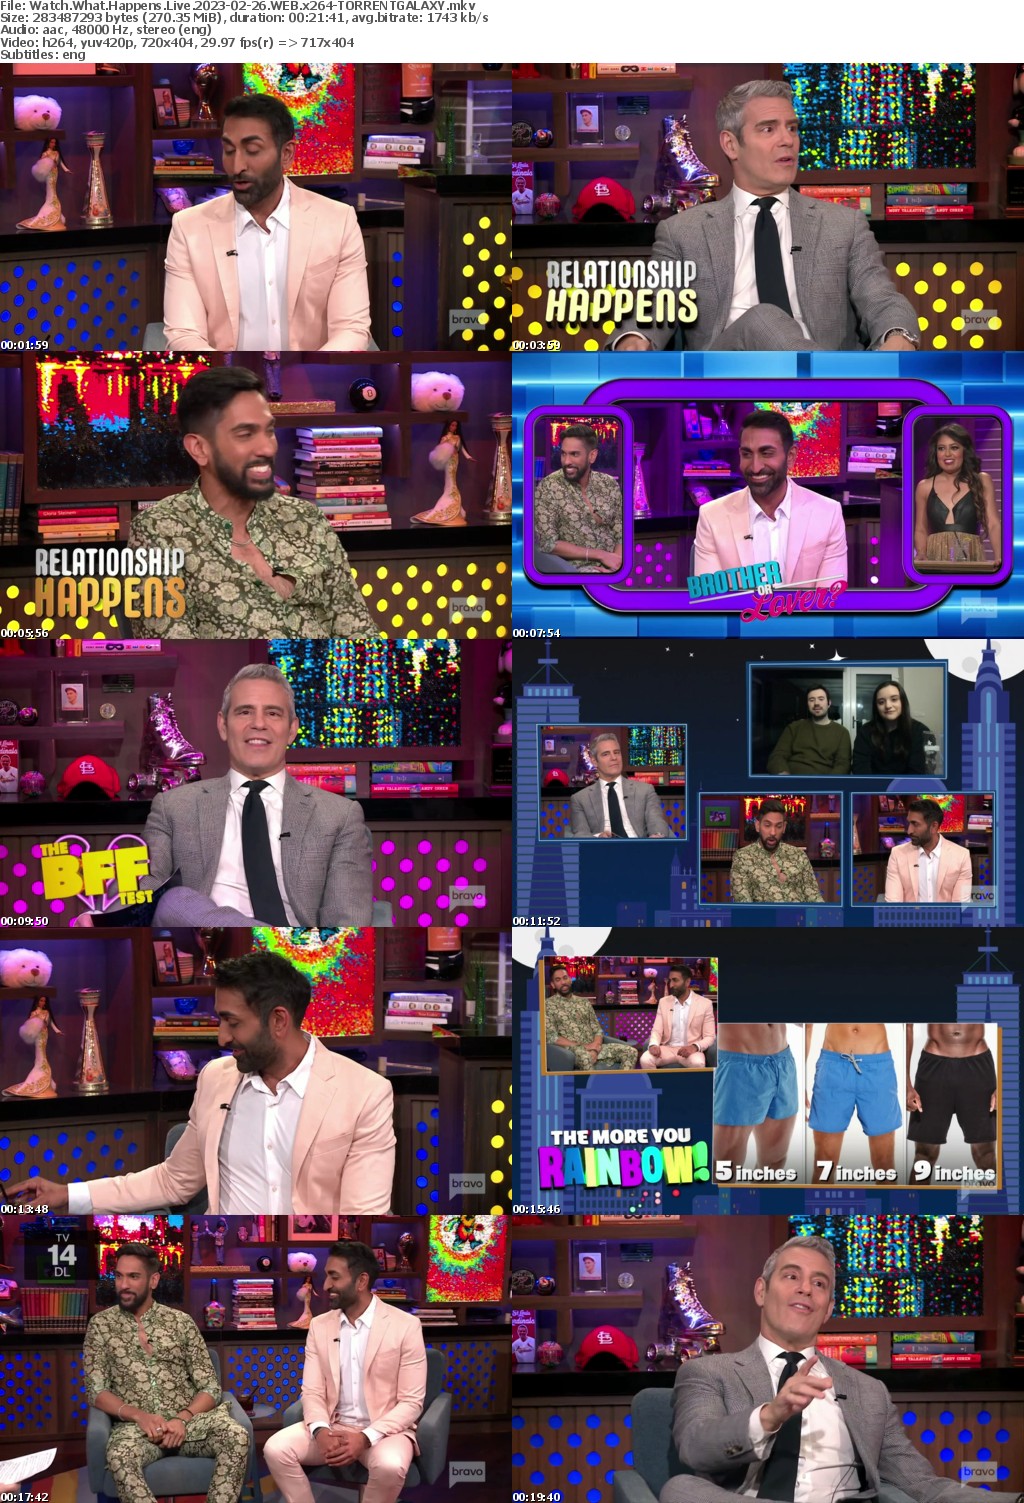 Watch What Happens Live 2023-02-26 WEB x264-GALAXY